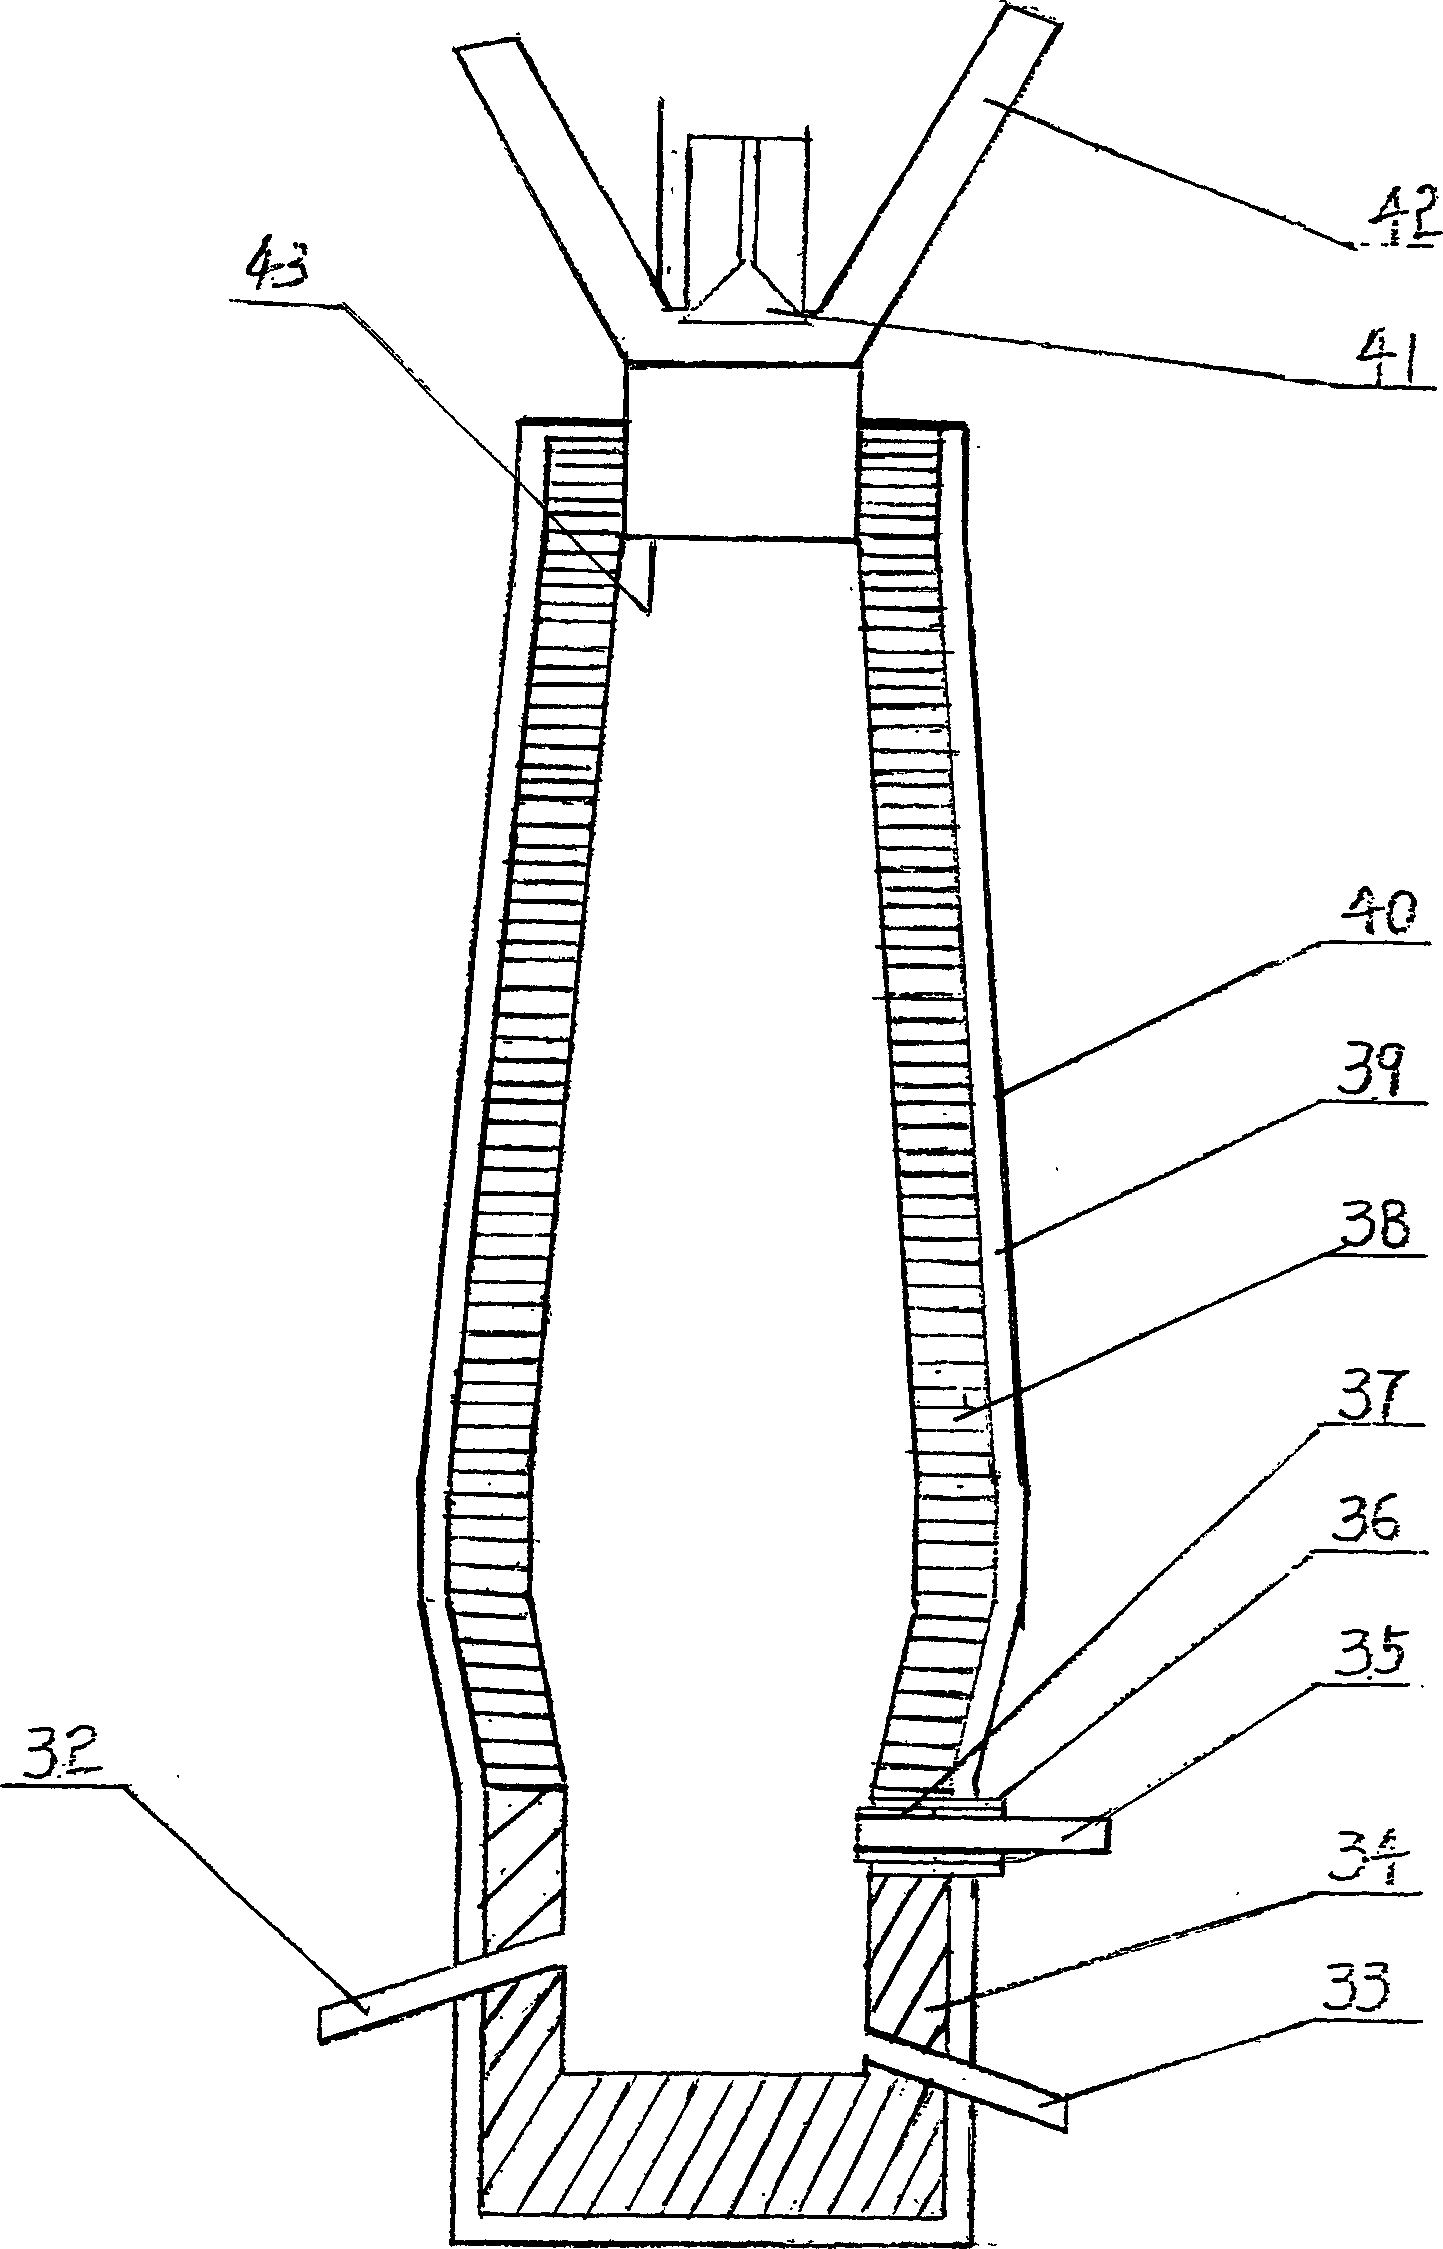 Method and apparatus for preparing calcium carbide by oxygen-fuel blowing of high furnace